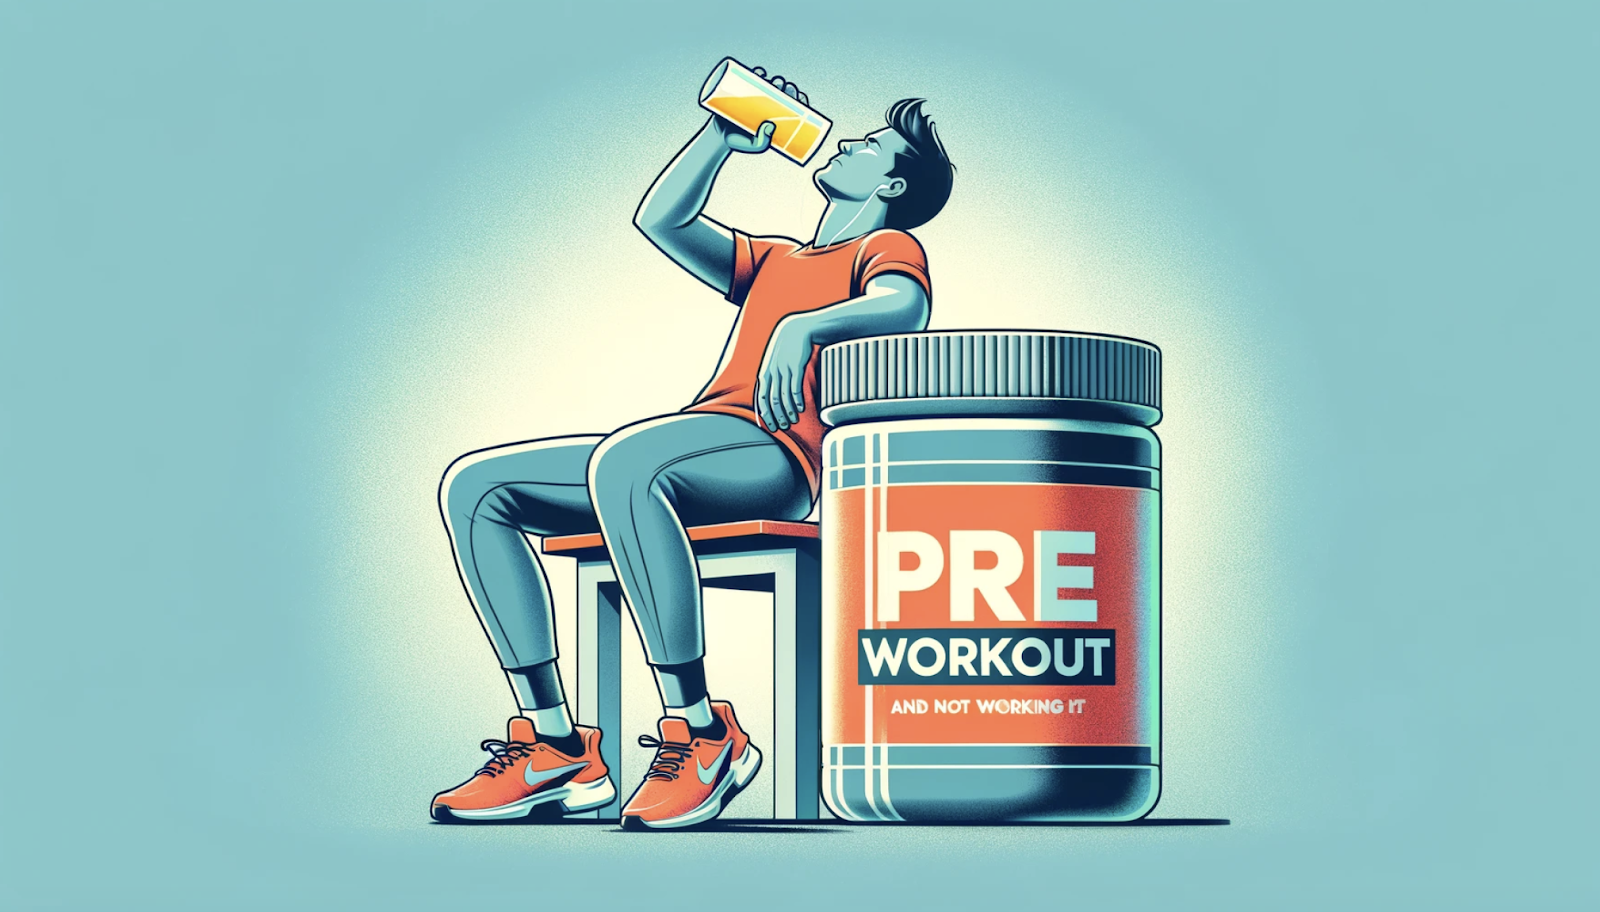 Are you considering trying a pre-workout drink to boost your energy and performance during exercise? Before you do, it's important to understand what pre-workout is and the benefits it can offer.